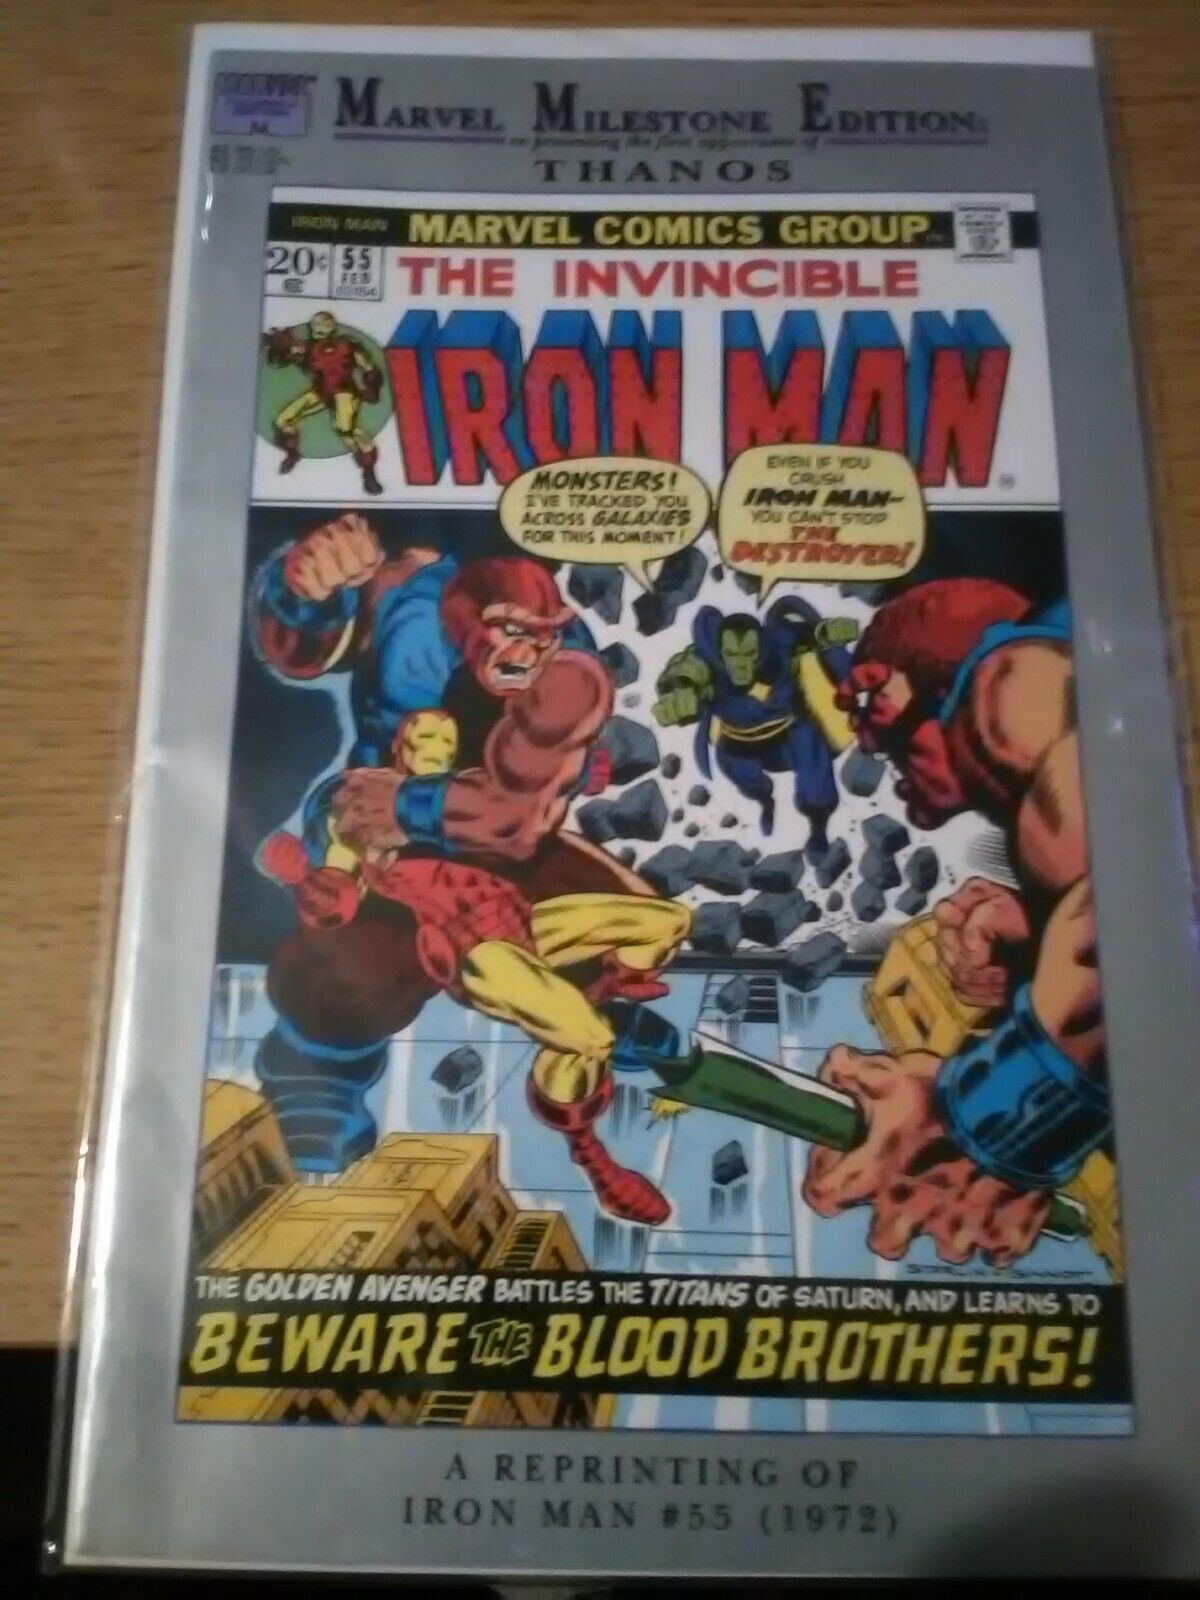 Iron Man vs The Blood Brothers